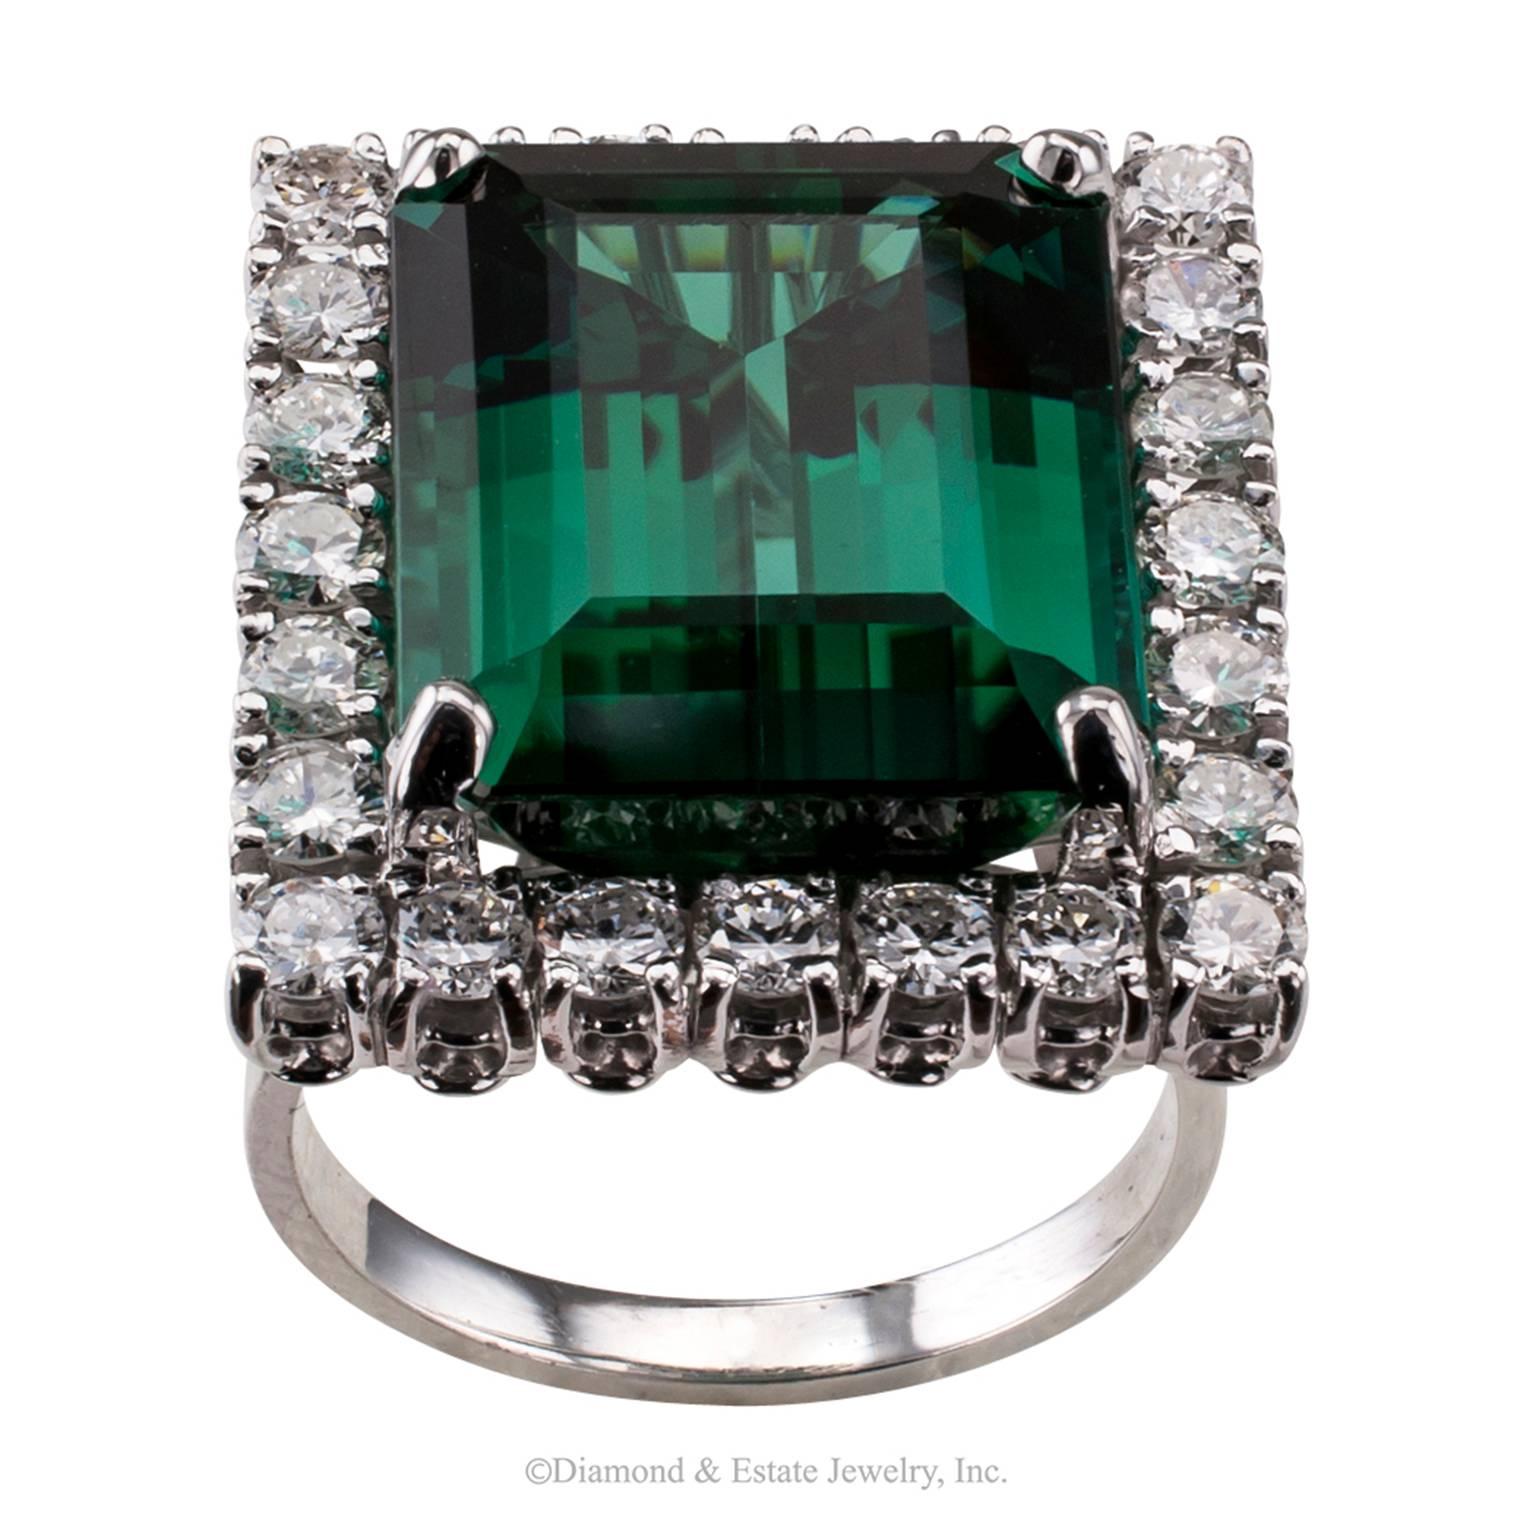 1960s Emerald-cut Blue-green Tourmaline Diamond Cocktail Ring

This ring is set with an incredible 15.04 carats emerald-cut blue-green tourmaline surrounded by diamonds set in this hand made 14-karat white gold setting, circa 1960.  The 15.04 carats